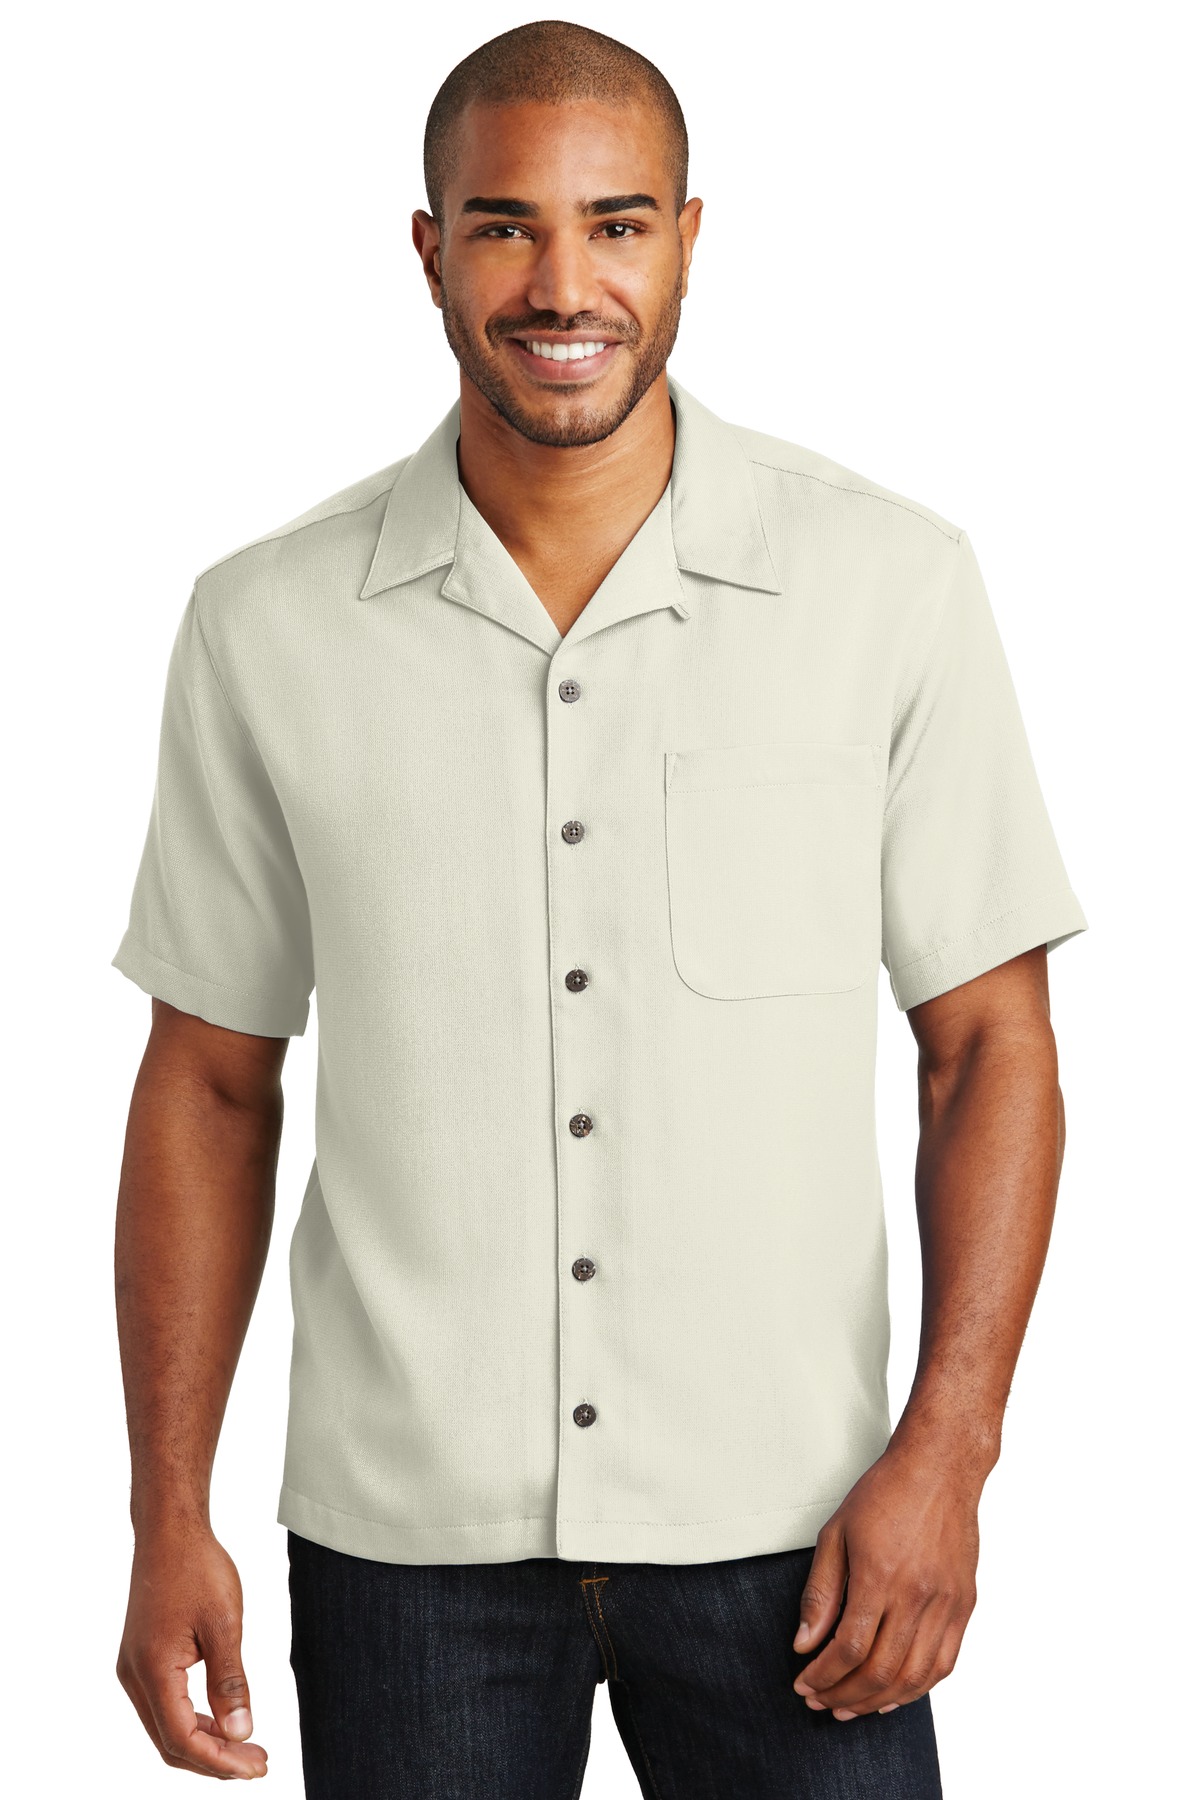 Port Authority Easy Care Camp Shirt.  S535